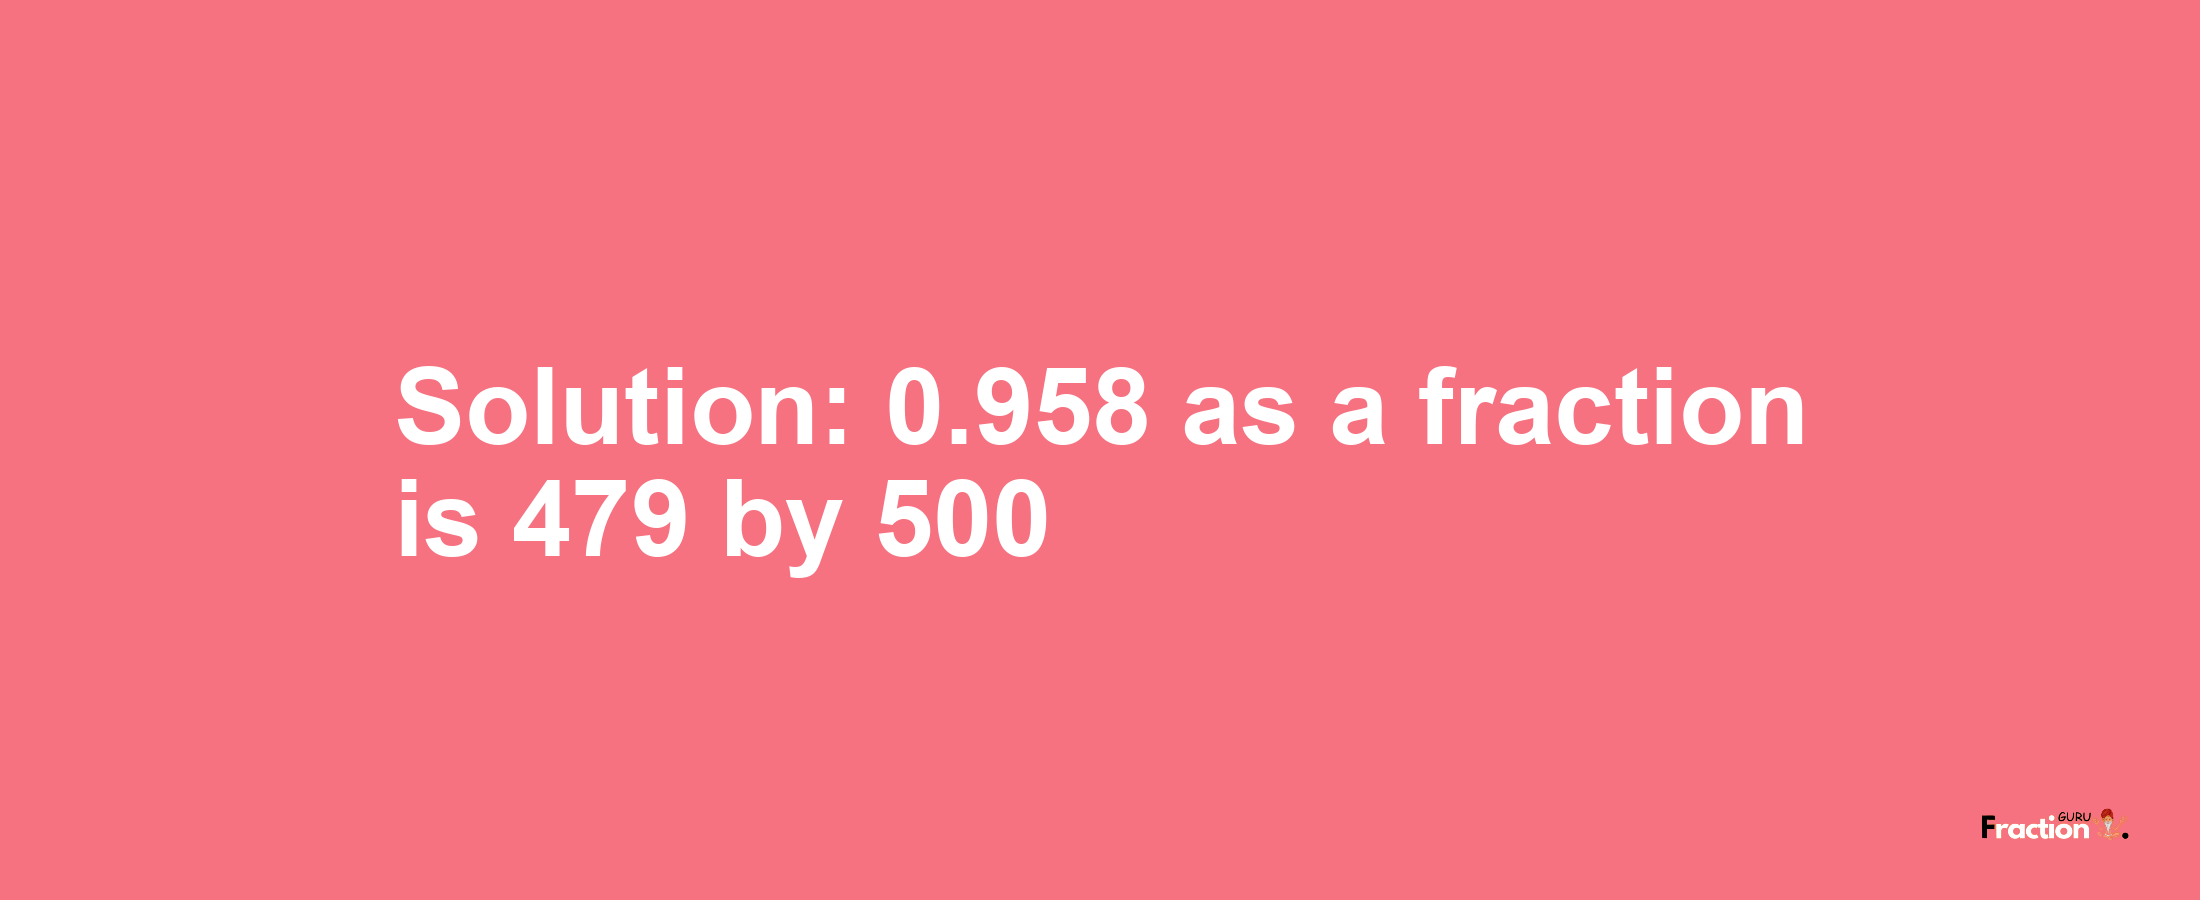 Solution:0.958 as a fraction is 479/500